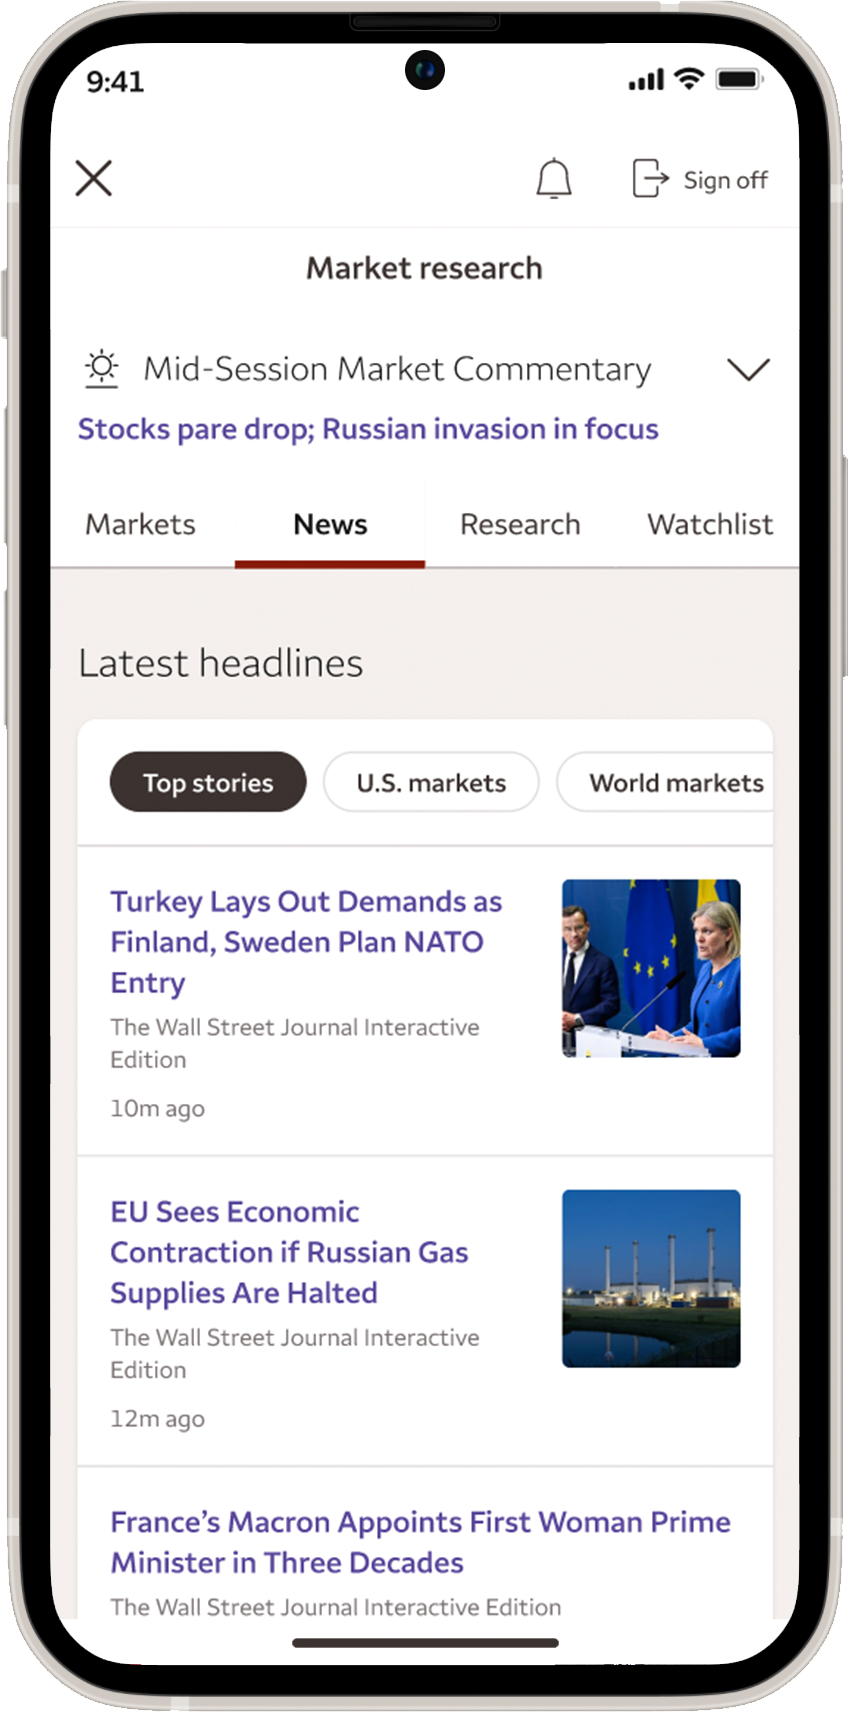 Mobile phone showing the Wells Fargo Mobile app Market research news screen